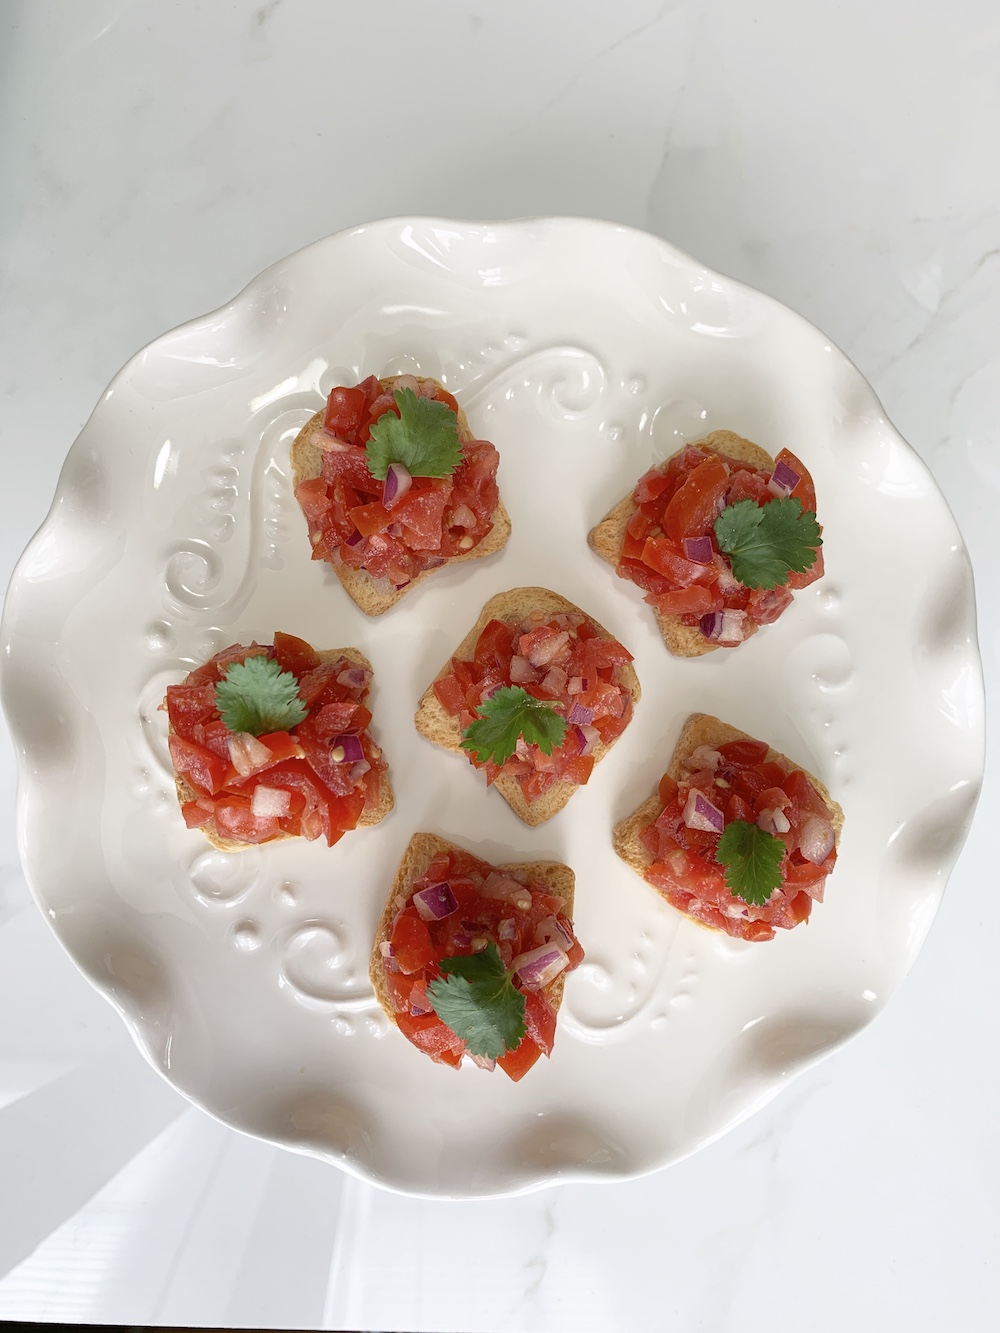 Grape Tomato Bruschetta, a Quick and Easy Appetizer Grape Tomato Bruschetta #Bruschetta #GrapeTomatoes #TomatoBruschetta #QuickandEasy #BudgetFriendly #Affordable #Healthy #Appetizer #AffordableFood #SaveTime #SaveMoney